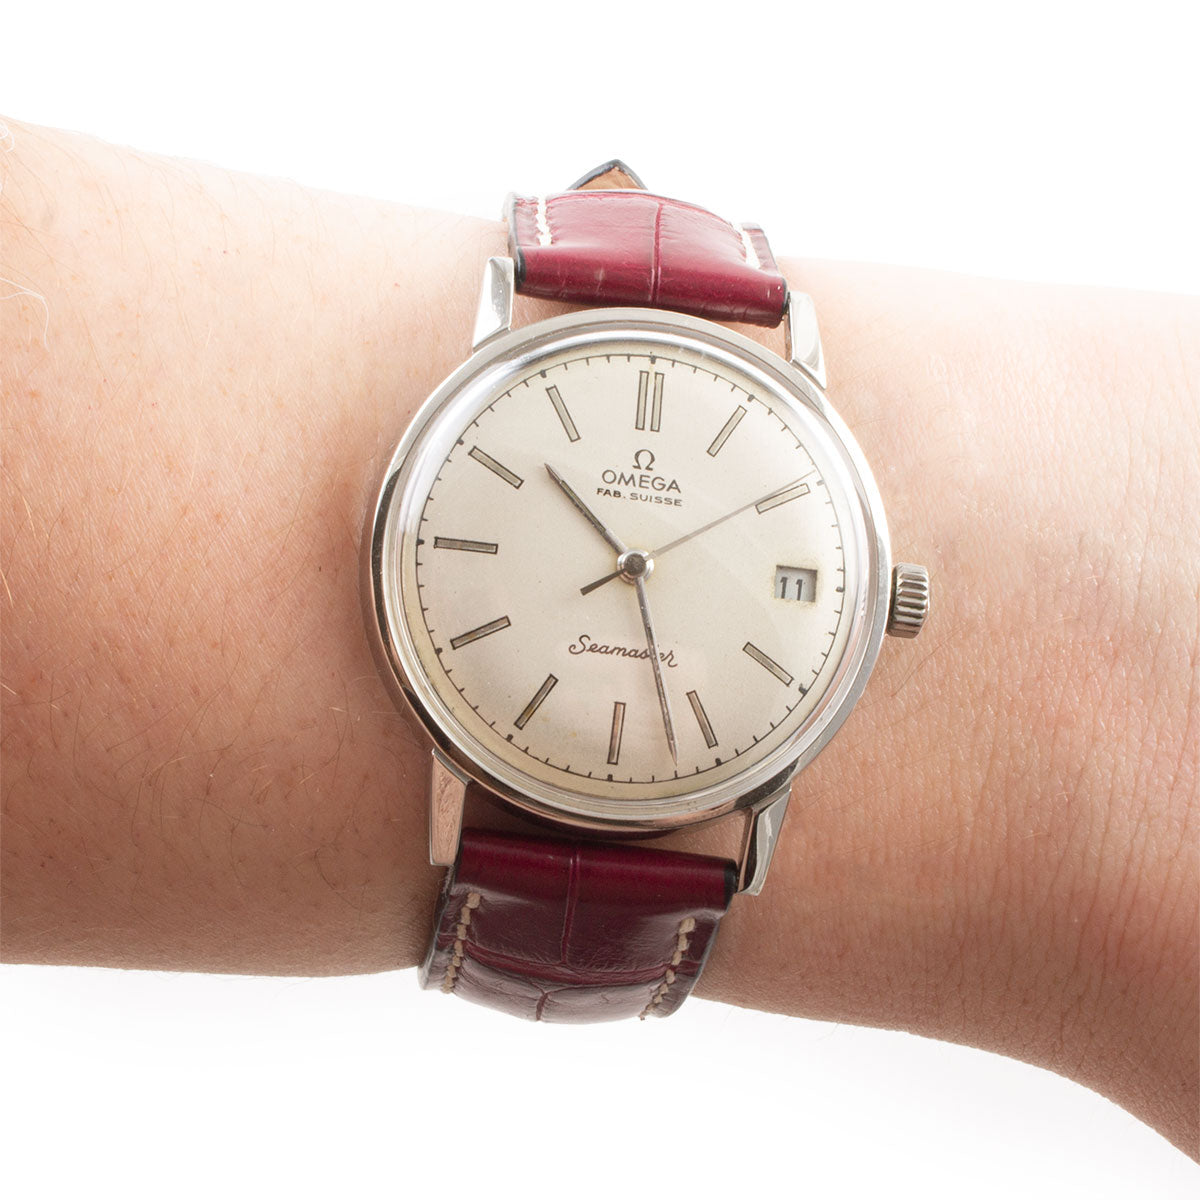 Montre d'occasion - Omega - Seamaster Date - 1900€